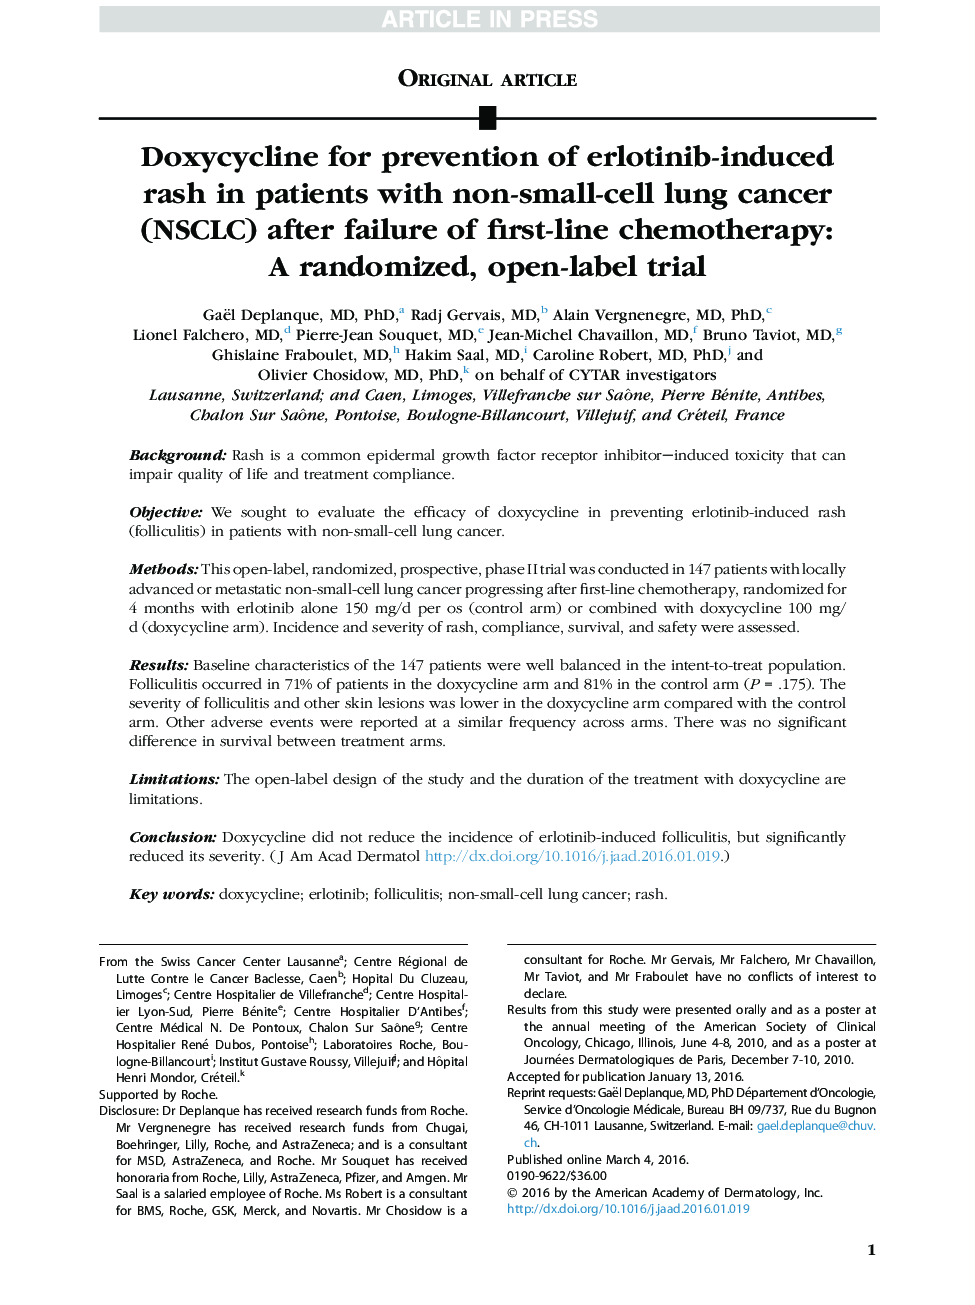 Doxycycline for prevention of erlotinib-induced rash in patients with non-small-cell lung cancer (NSCLC) after failure of first-line chemotherapy: A randomized, open-label trial